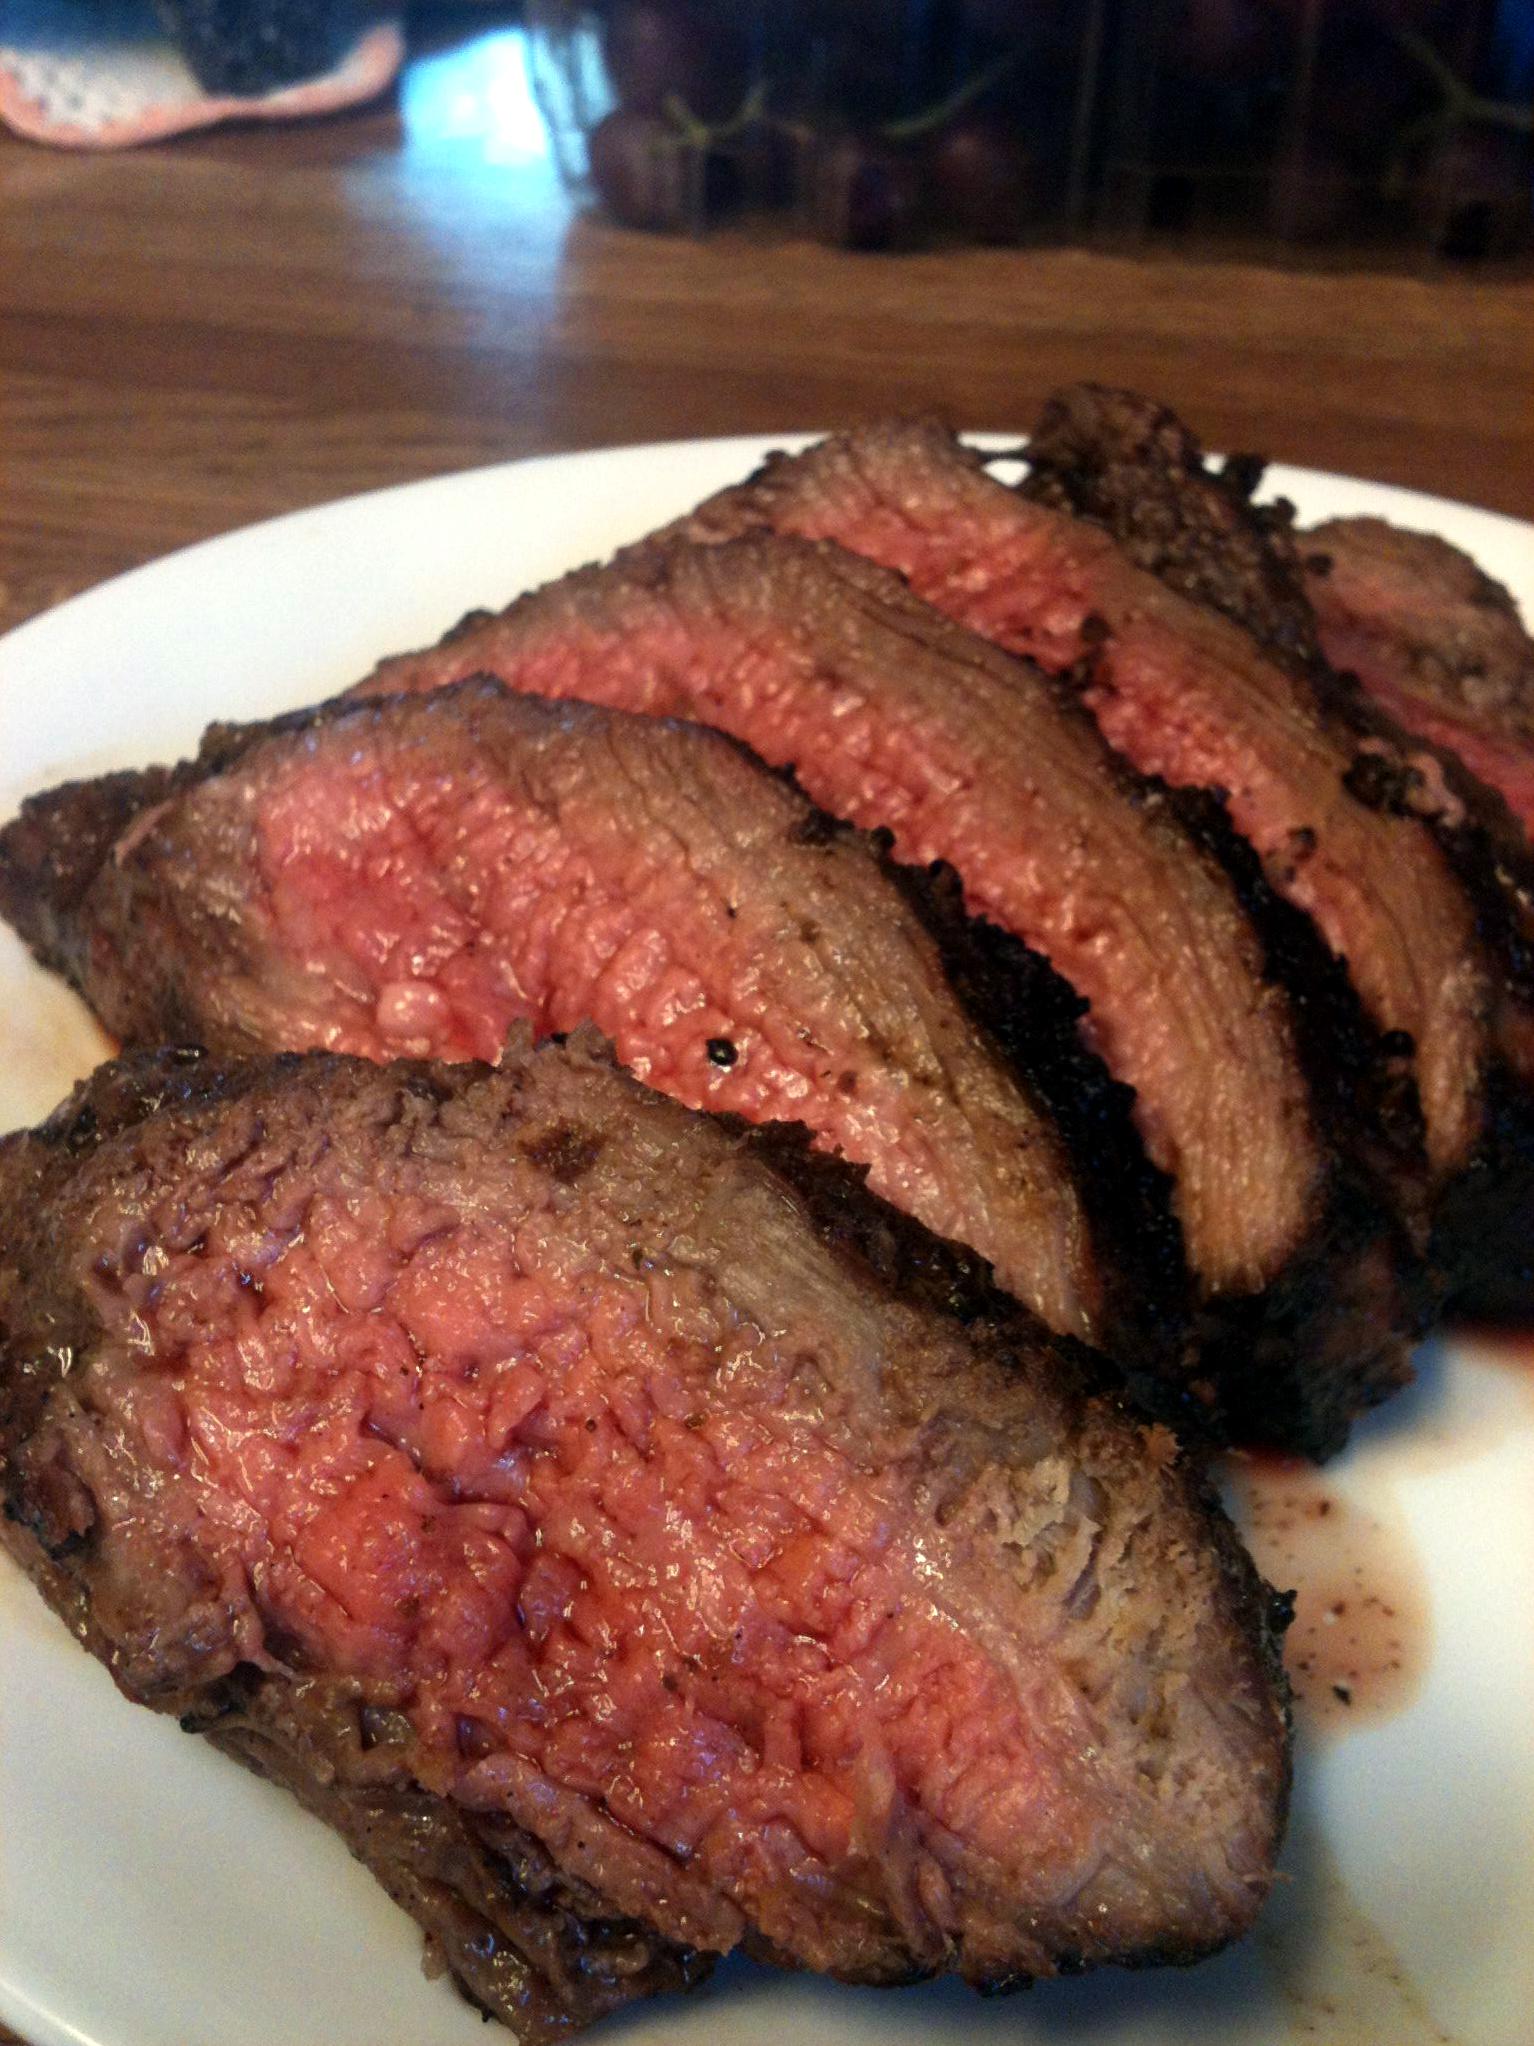  Sizzle up your dinner with this irresistible BBQ Tri-Tip Roast!